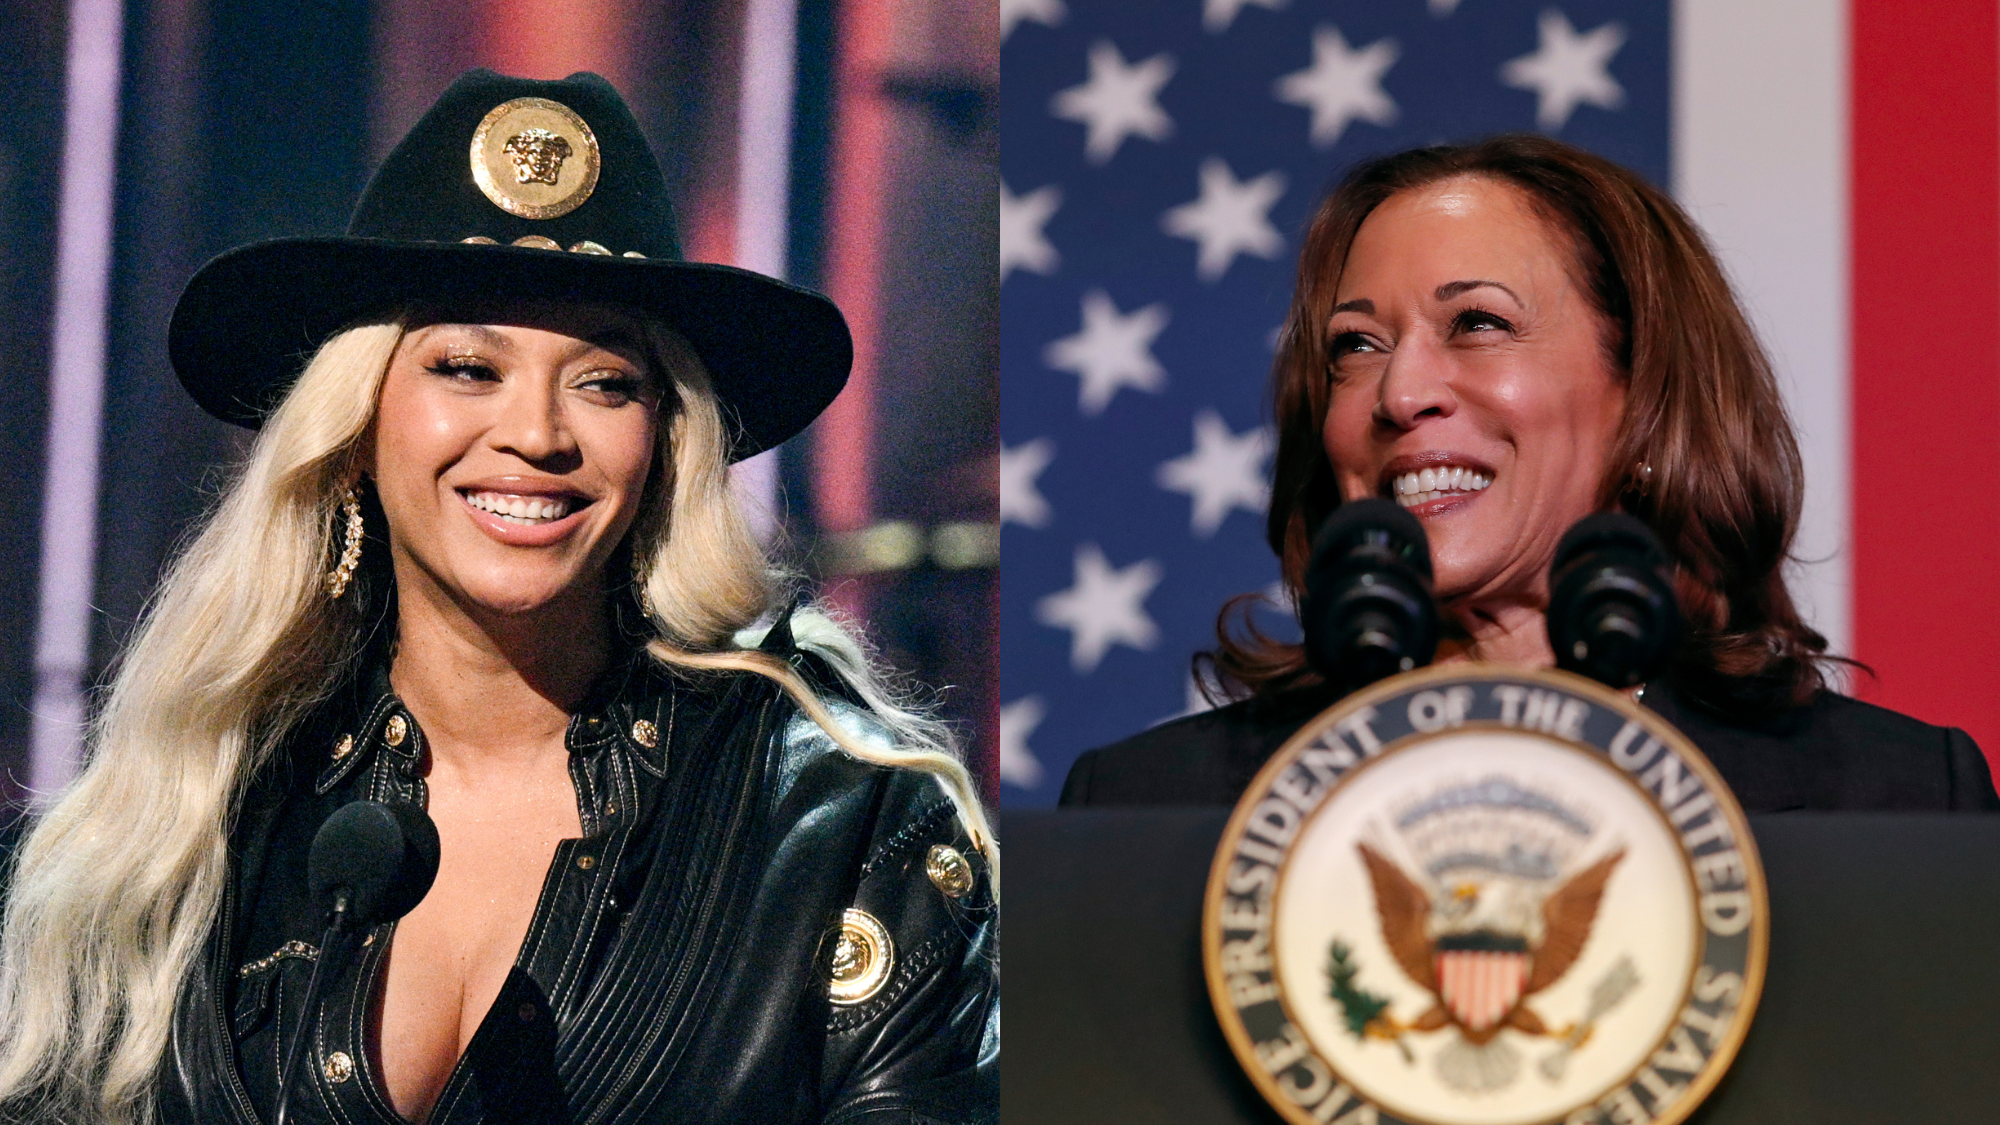 VP Kamala Harris Uses Beyoncé’s “Freedom” Song During First Presidential Campaign Speech